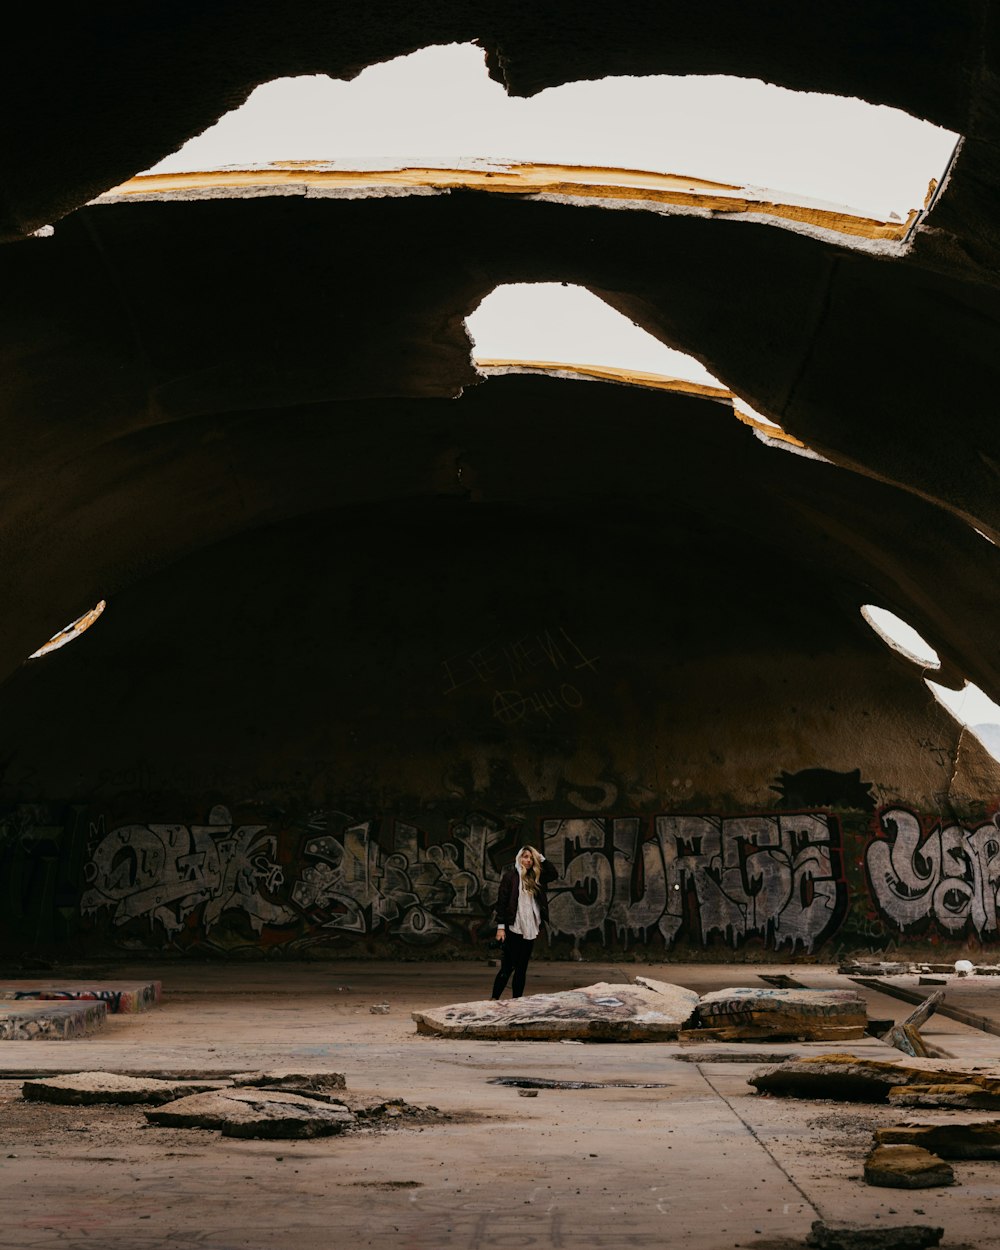 person standing under concrete dome building with holes on roof during daytime